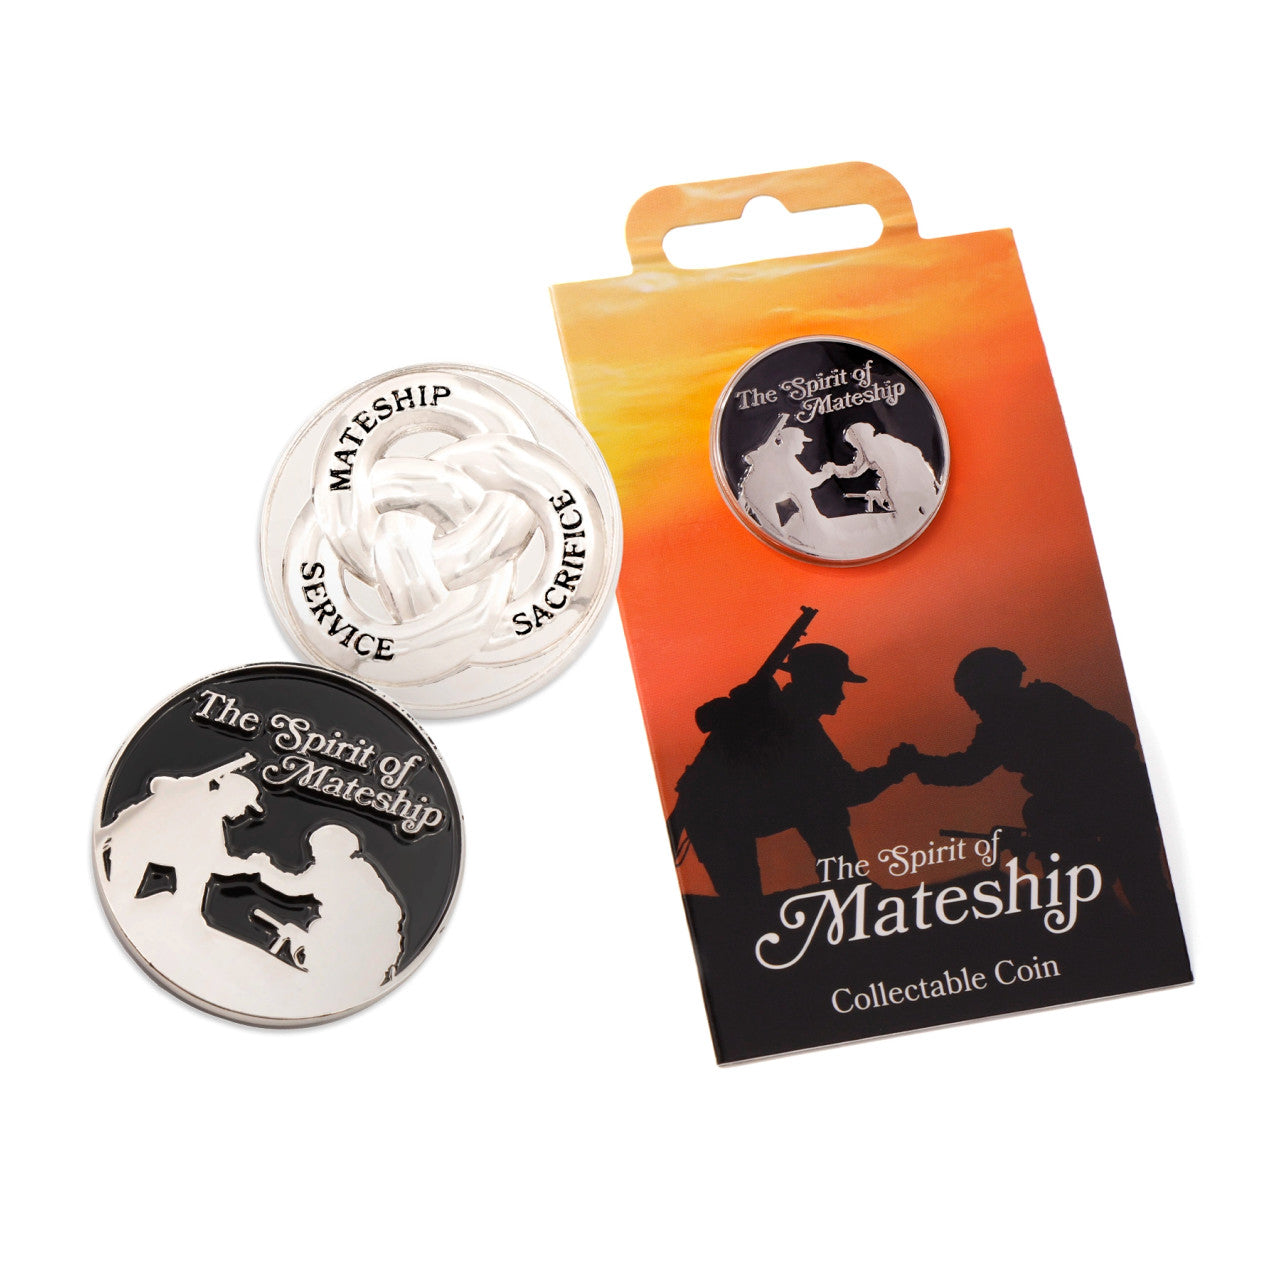 The "Spirit of Mateship Coin in Blister Pack" is a must-have for anyone who wants to celebrate the unwavering bond of mateship and honor the spirit of Australian soldiers. Get yours today and experience the profound connections and enduring strength it represents. www.defenceqstore.com.au